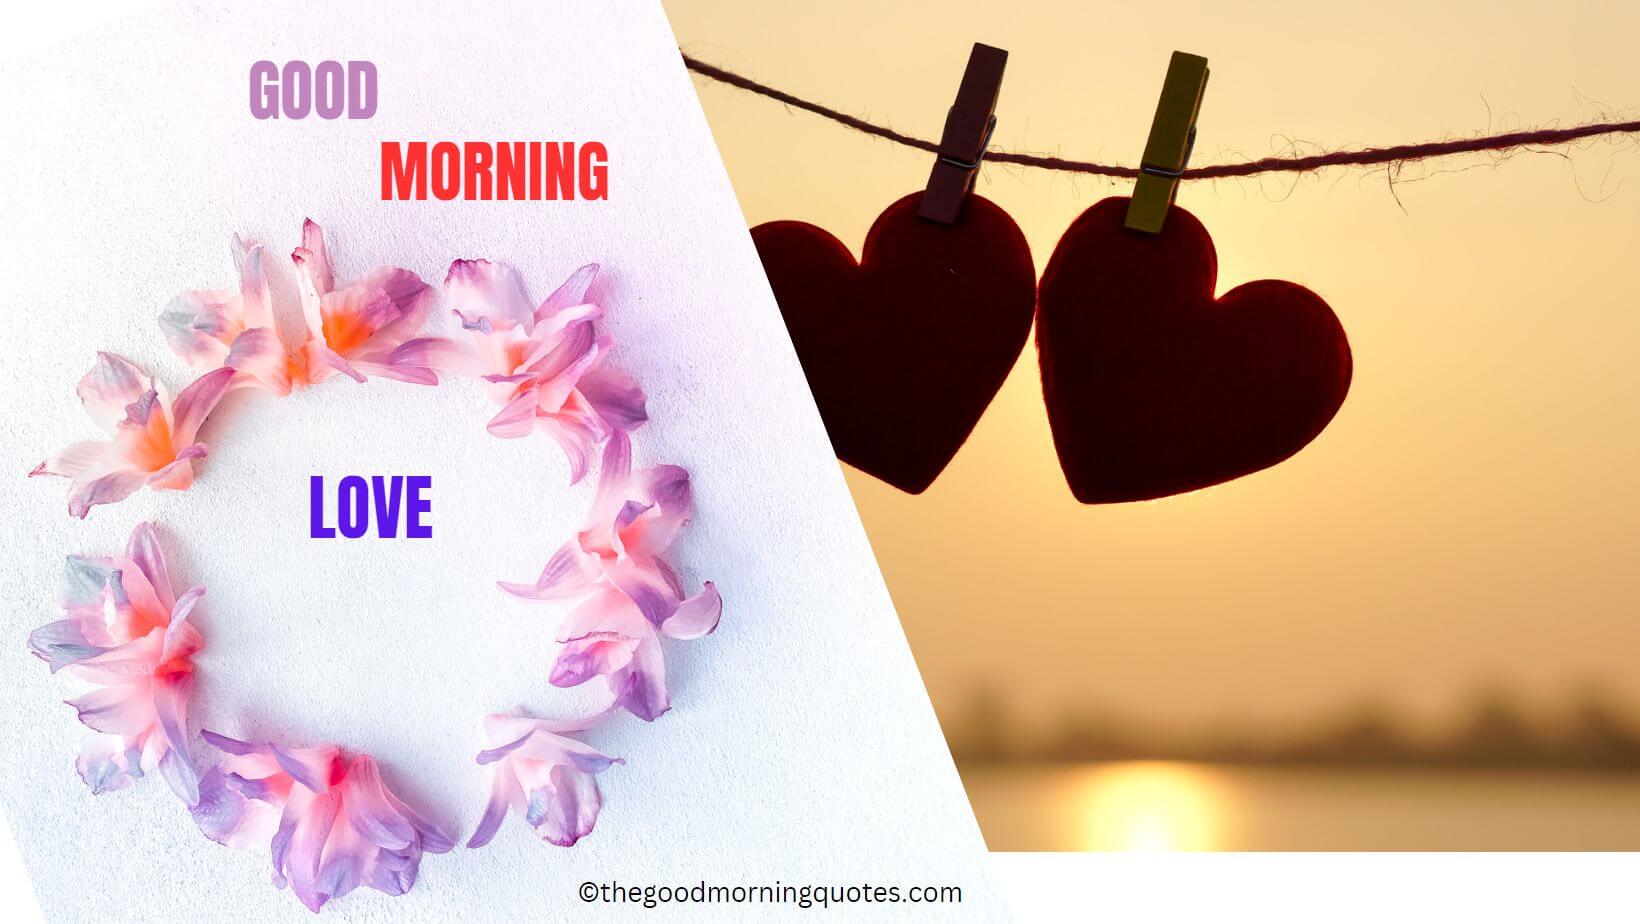 GOOD ORNING LOVEE QUOTES IN HINDI